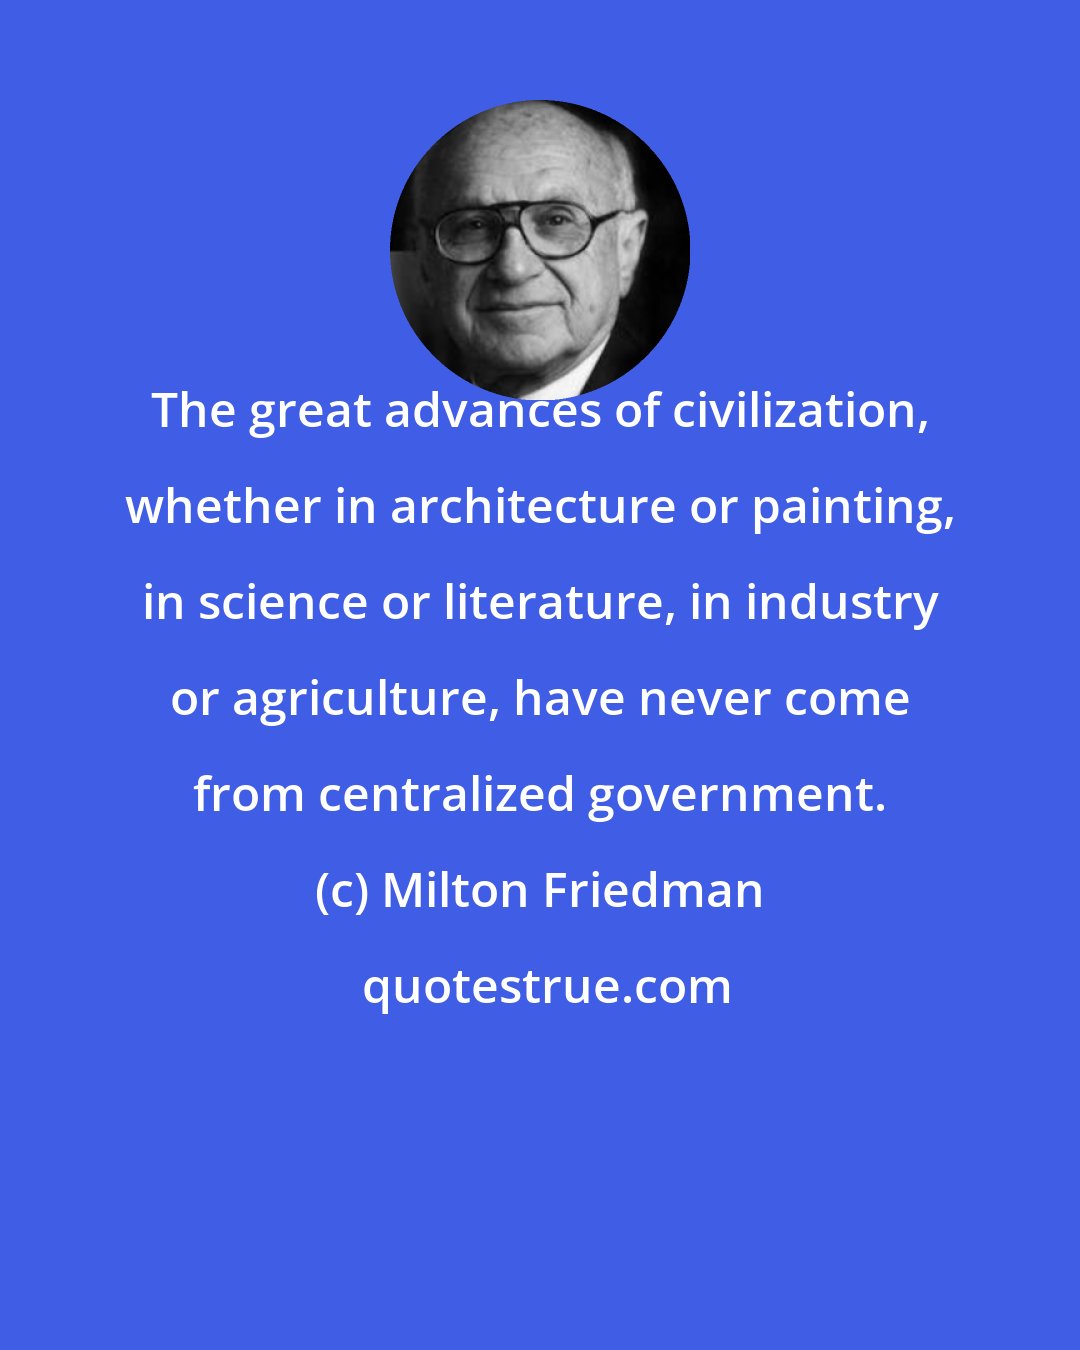 Milton Friedman: The great advances of civilization, whether in architecture or painting, in science or literature, in industry or agriculture, have never come from centralized government.